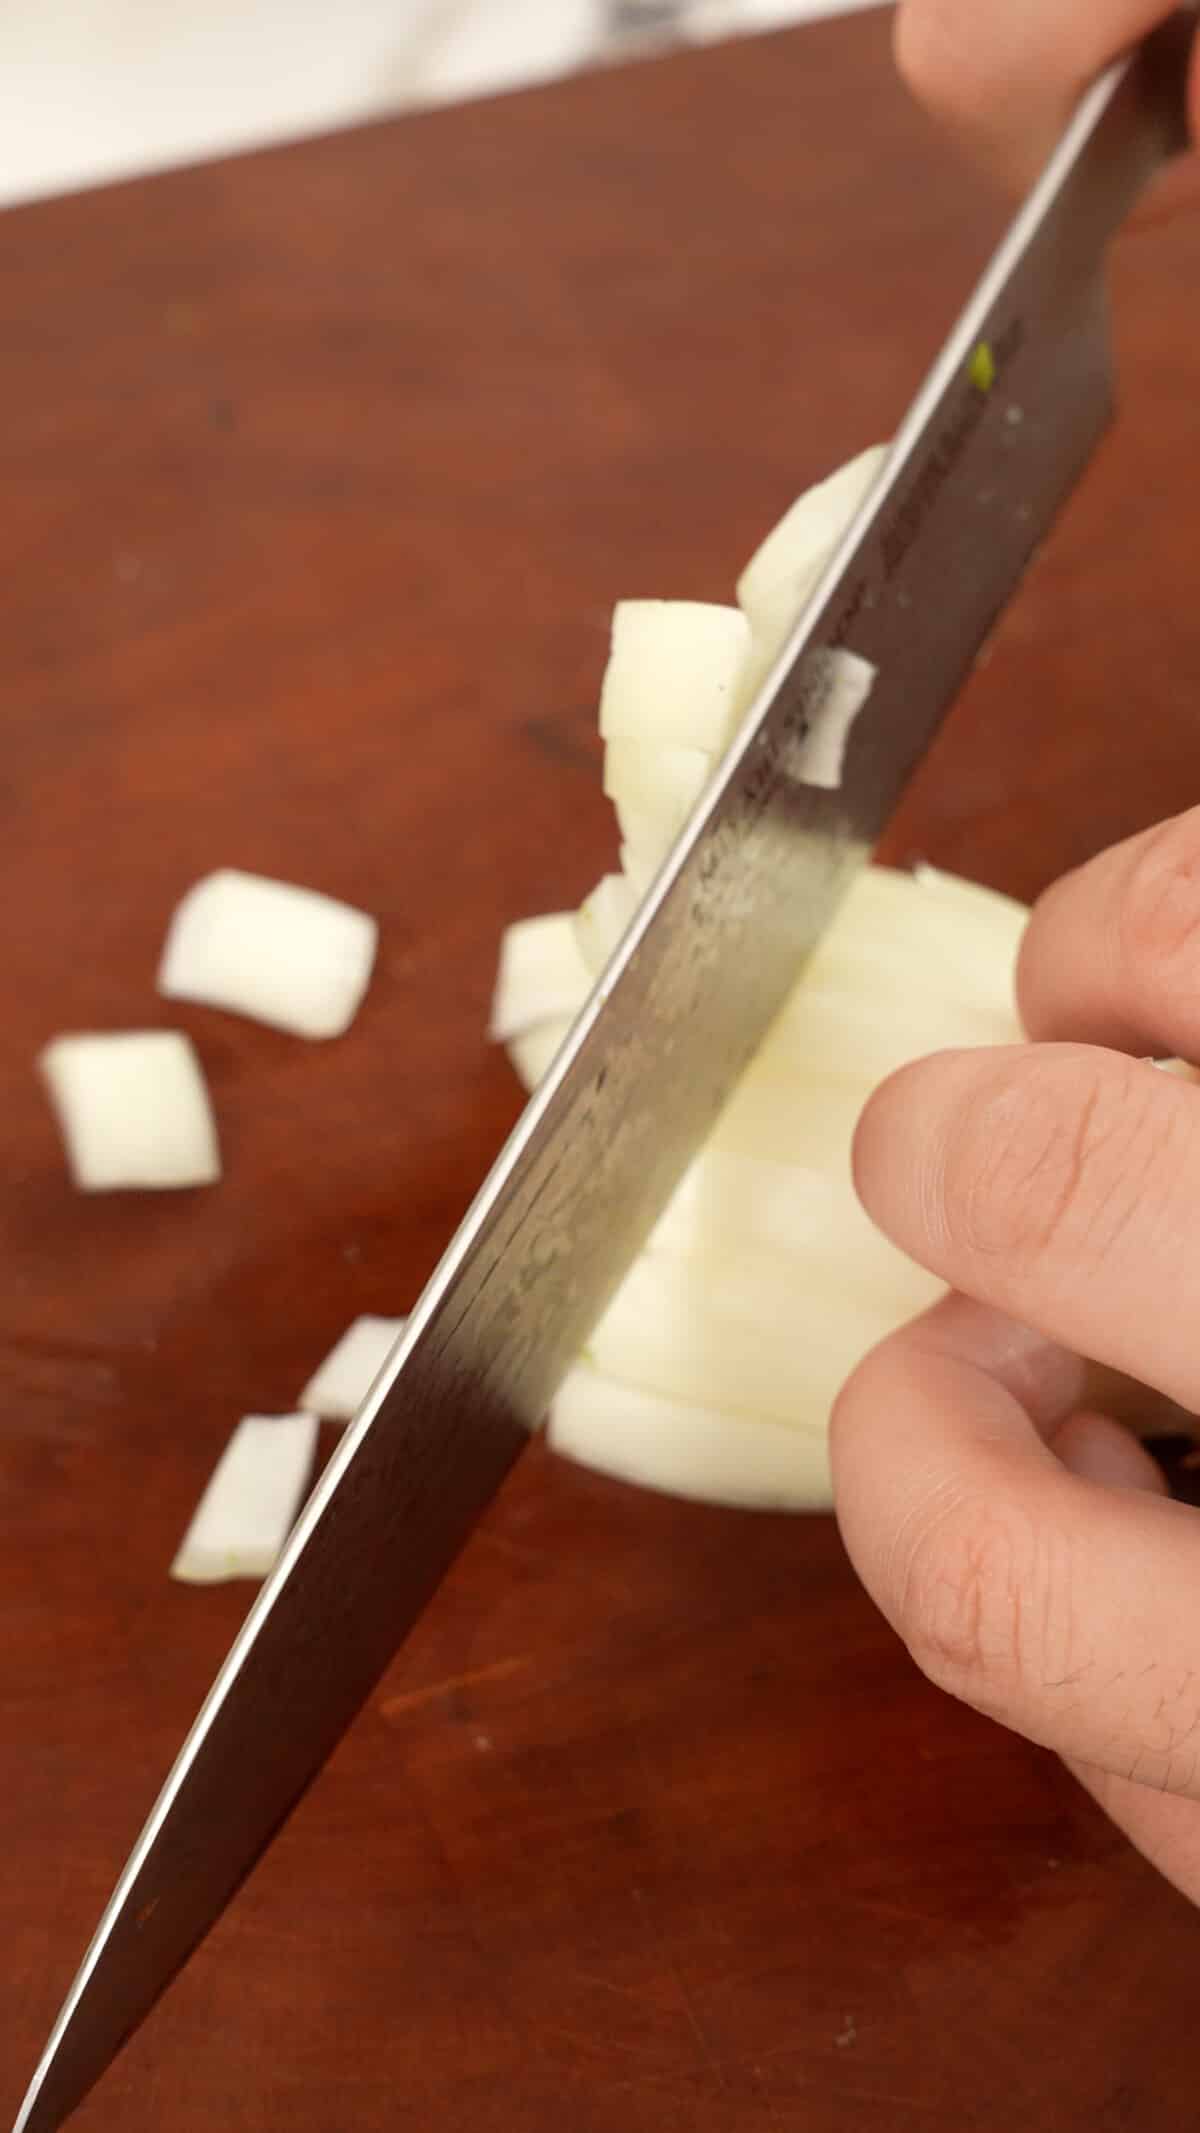 Dicing onions on a cutting board with a knife.